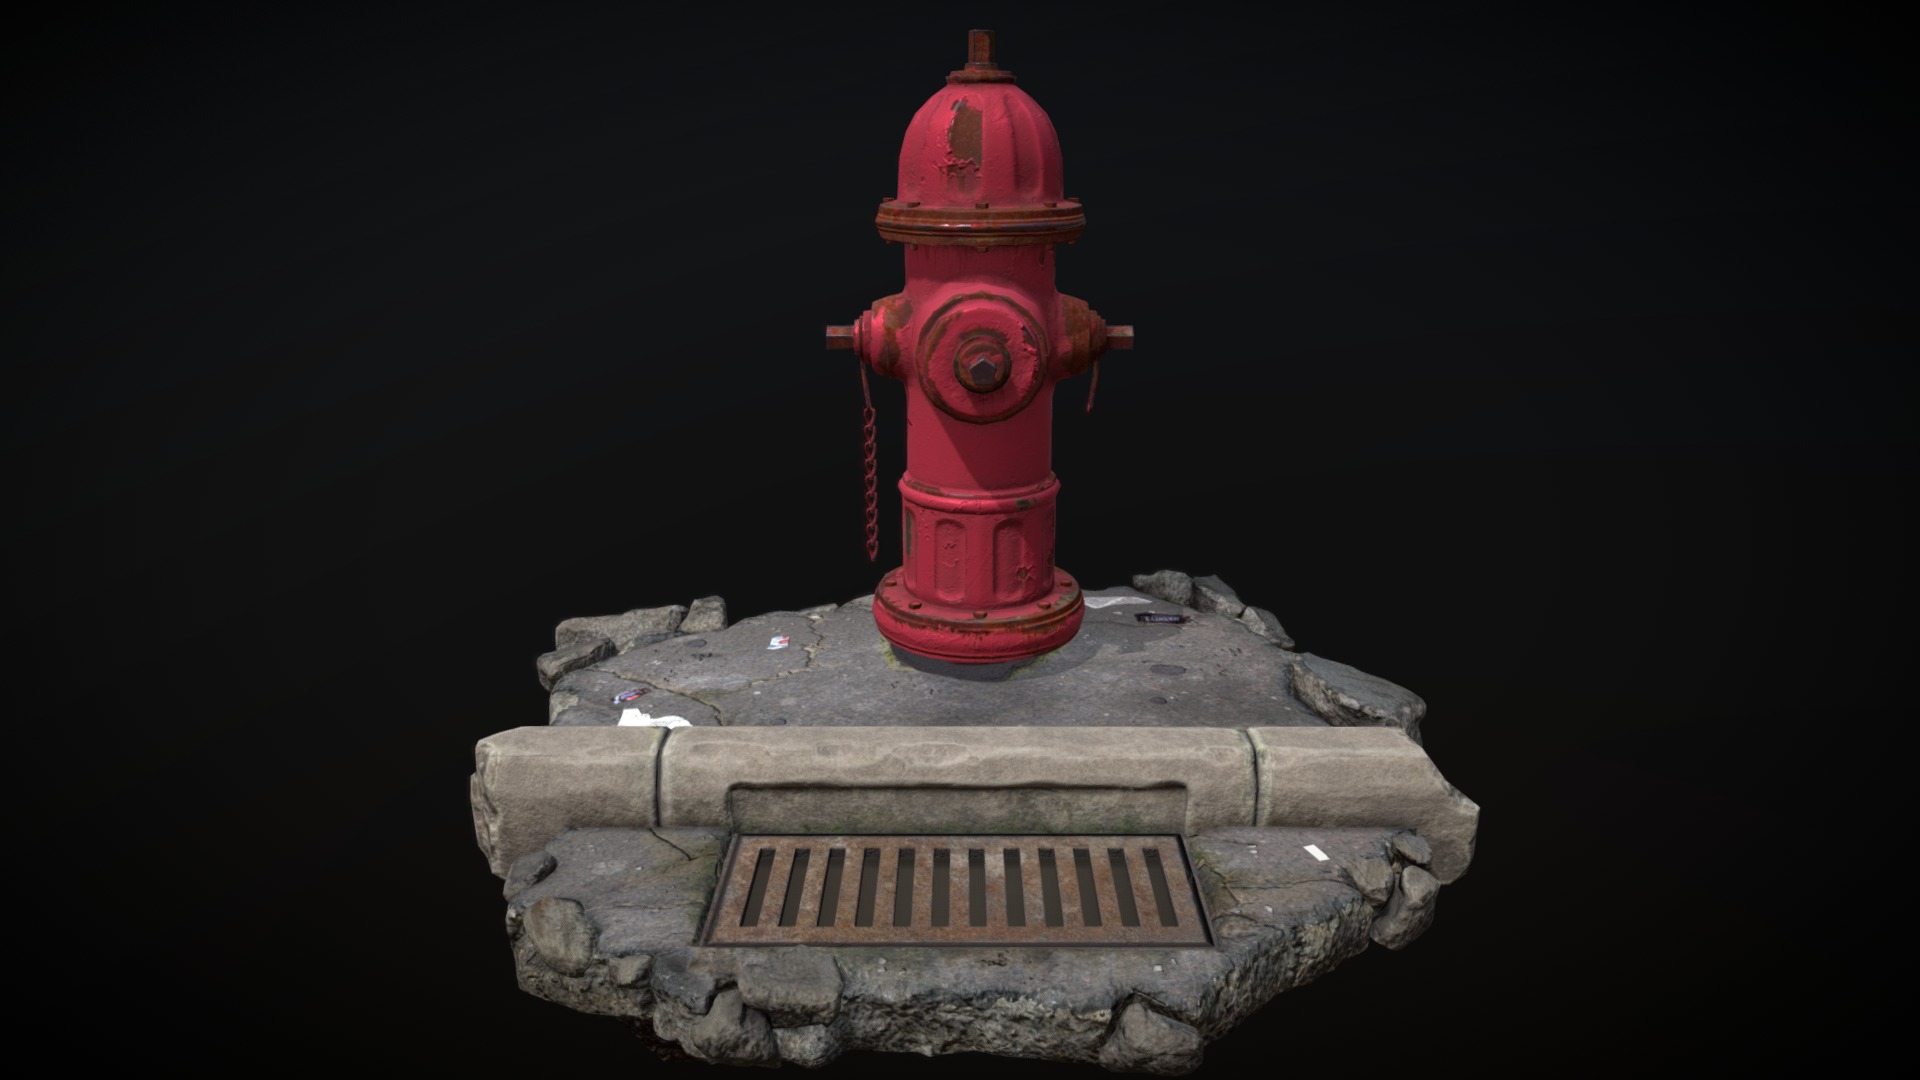 3D model Fire hydrant - This is a 3D model of the Fire hydrant. The 3D model is about a red fire hydrant on a rock.